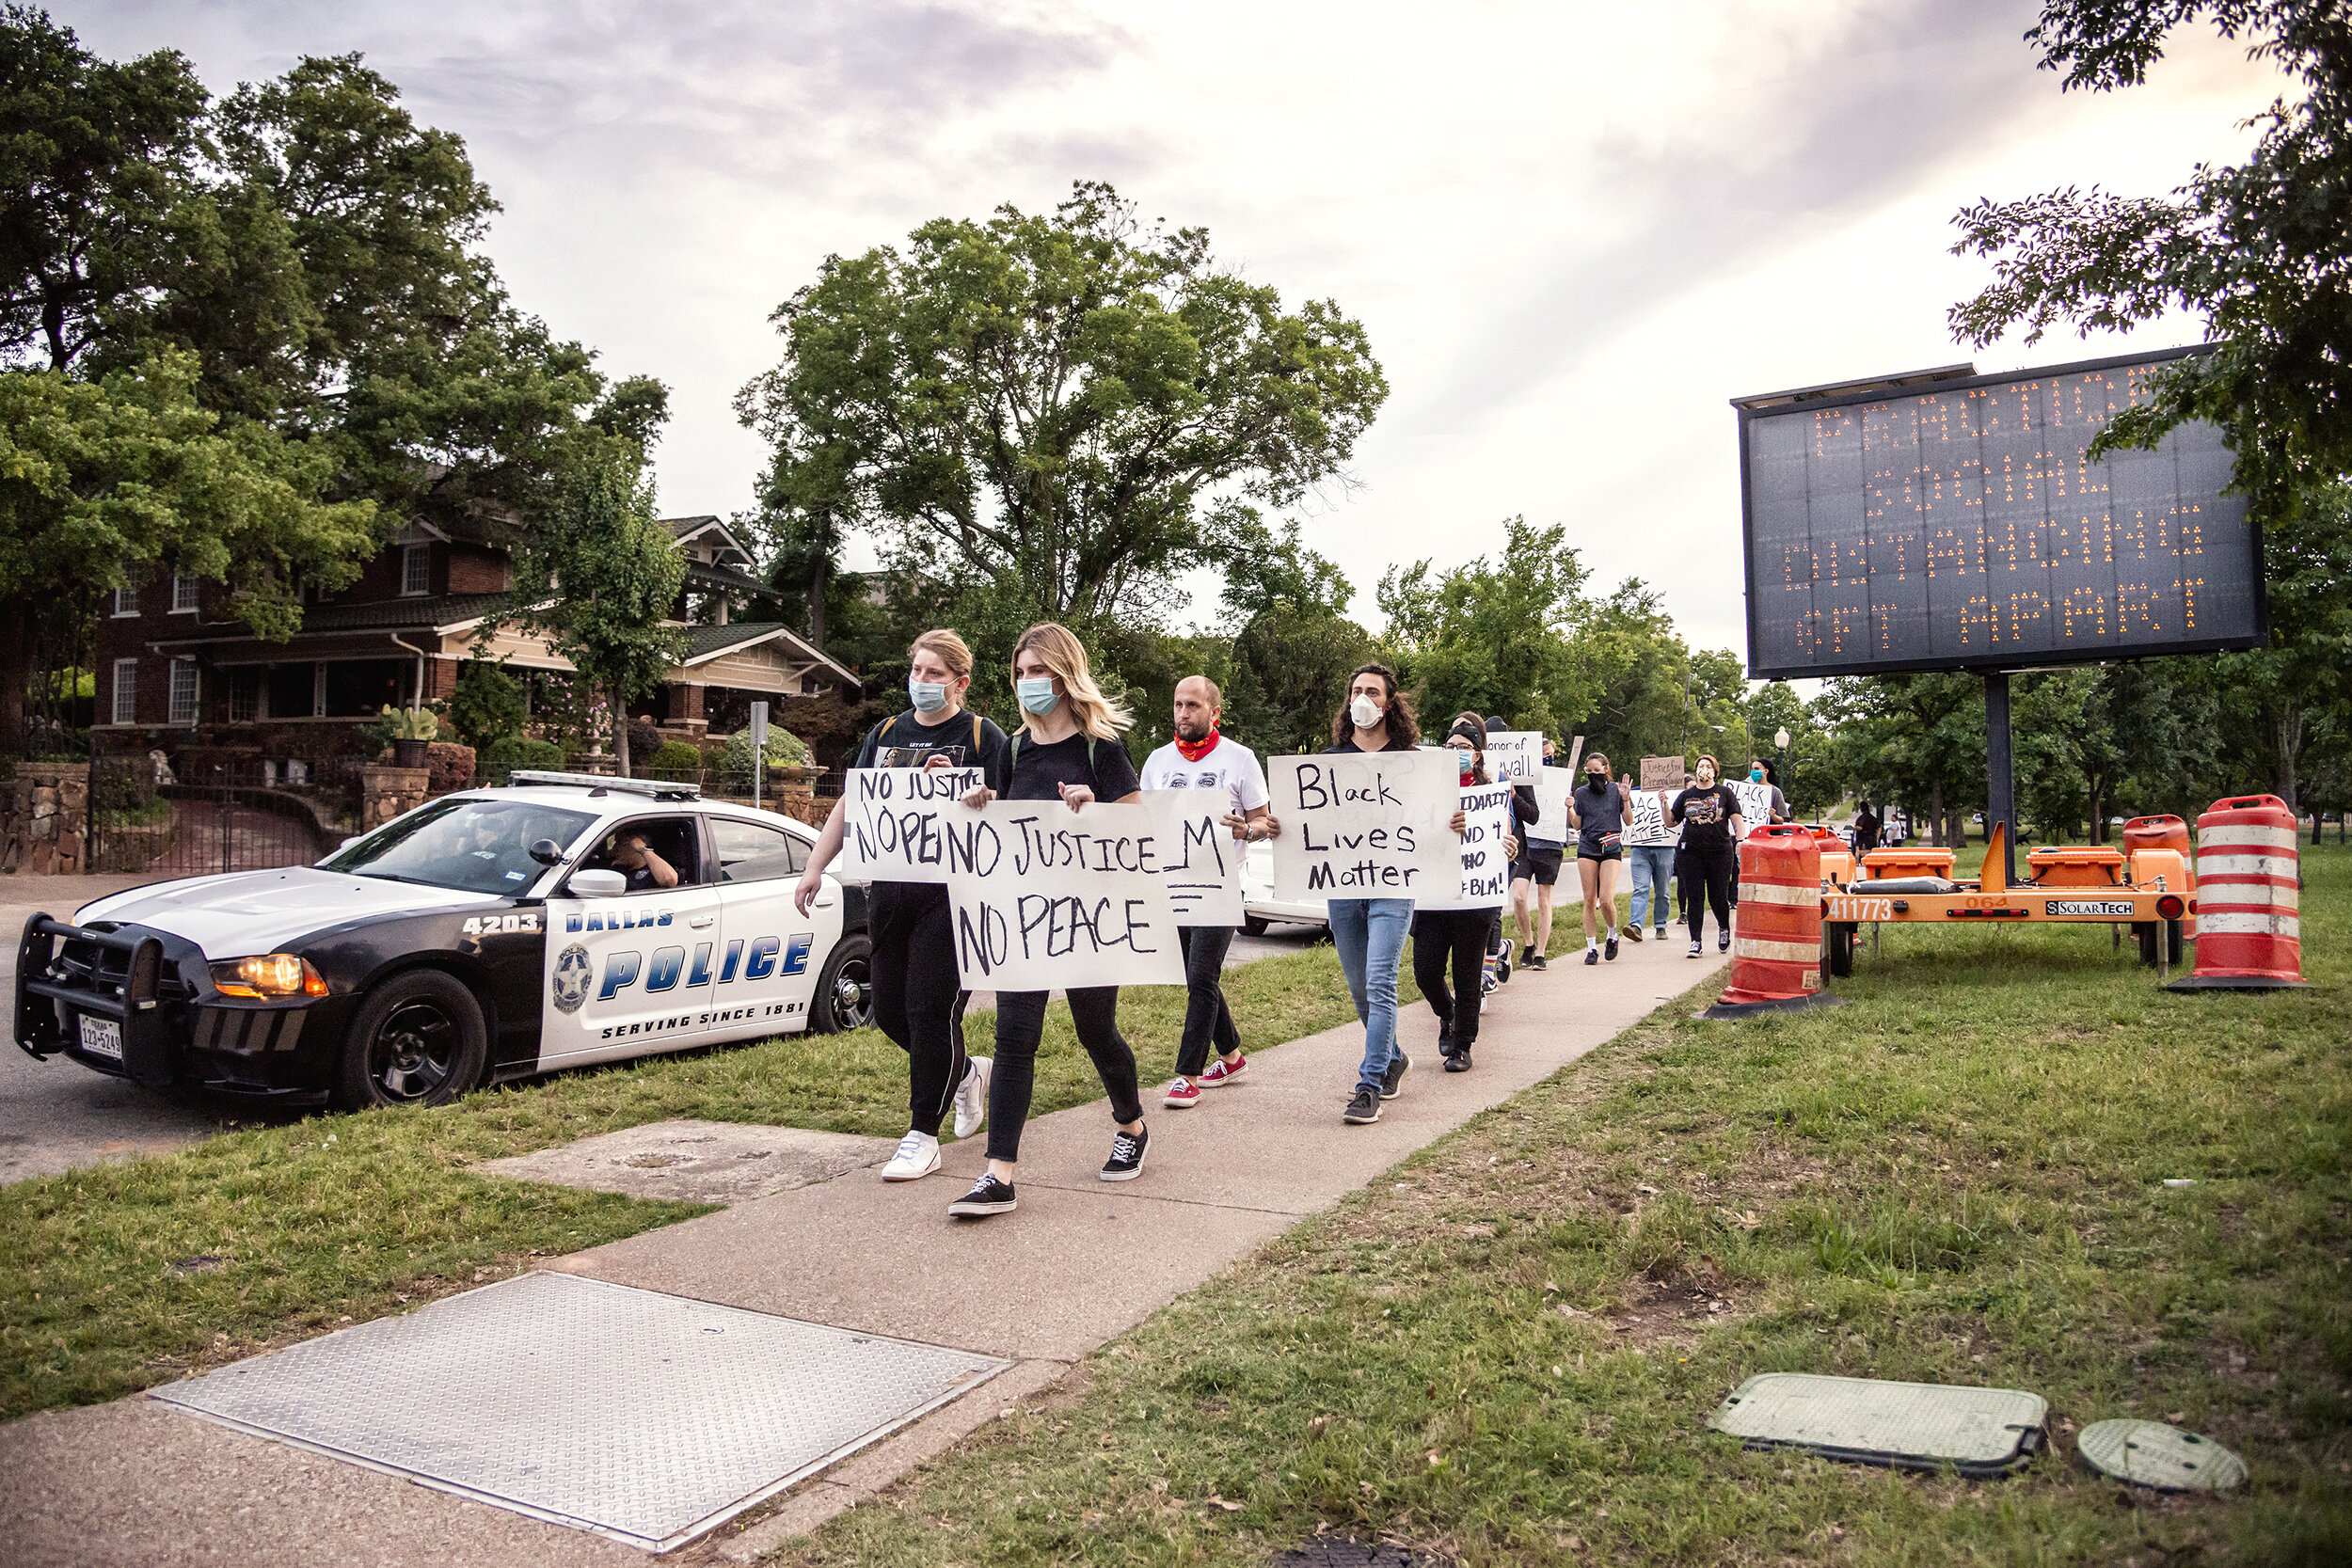  Protesters march through Lake Cliff Park in the Oak Cliff neighborhood of Dallas, TX on June 1, 2020.   Marchers publicly protested systemic racism despite state-wide calls to self-isolate during the fourth month of the COVID-19 pandemic. 